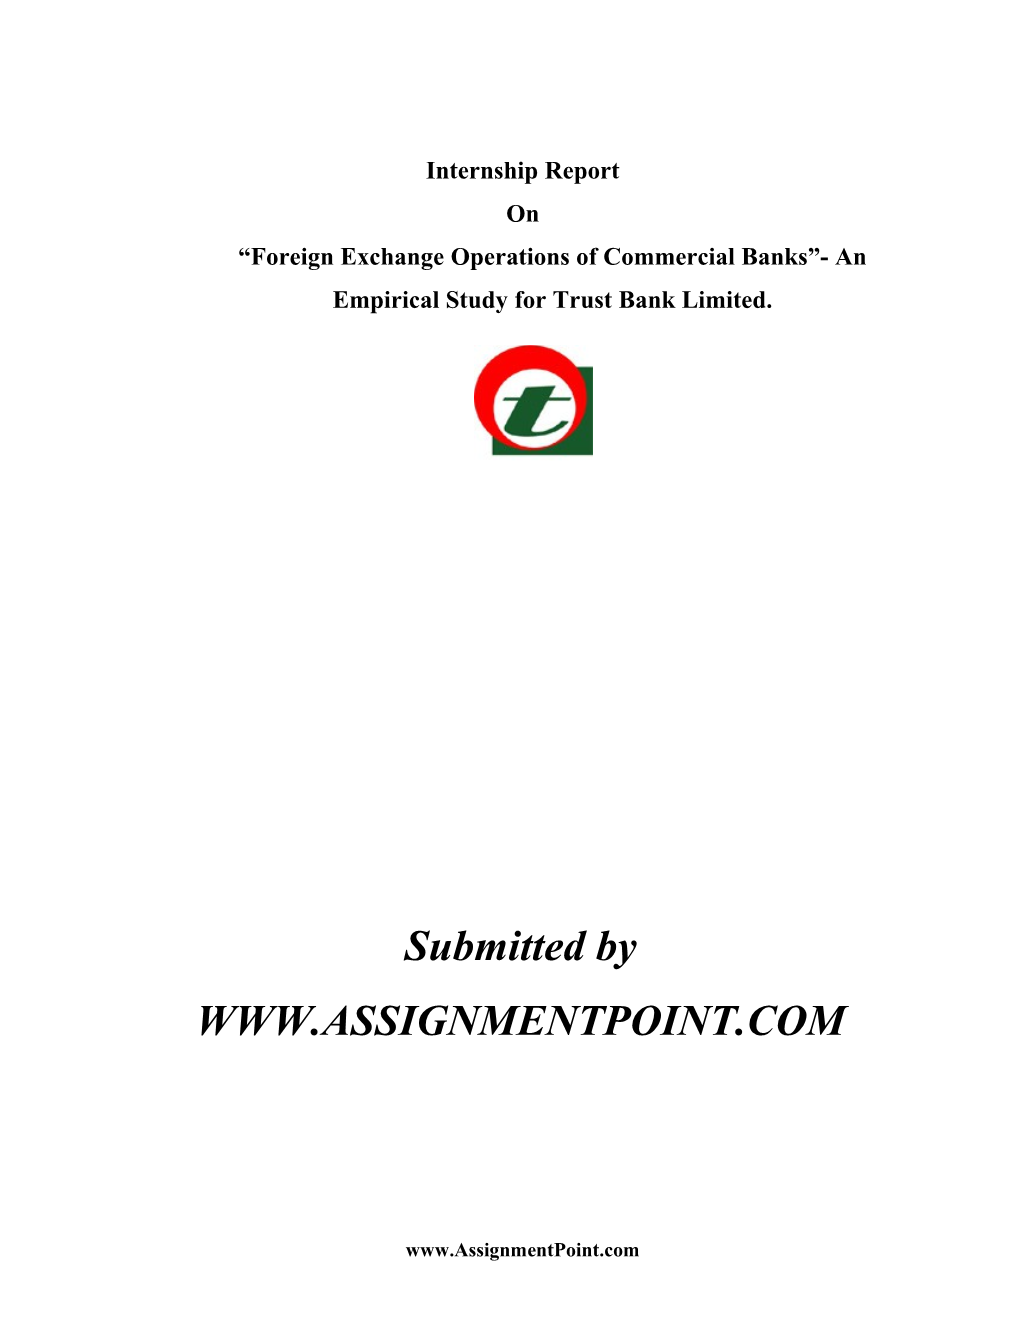 Foreign Exchange Operations of Commercial Banks - an Empirical Study for Trust Bank Limited